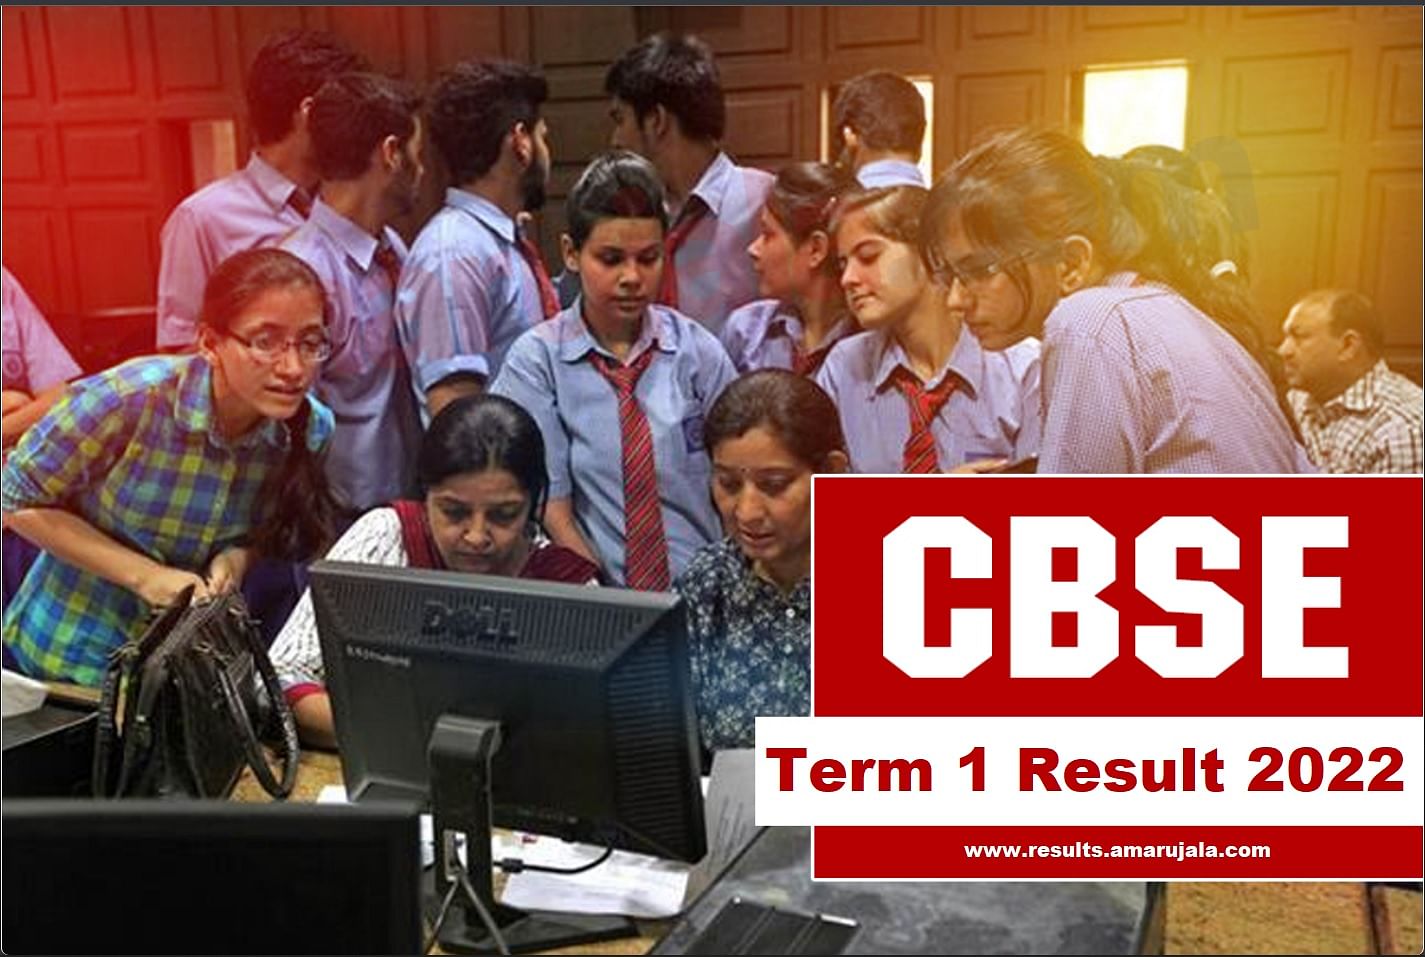 CBSE Class 10 Term 1 Result 2022 OUT, Class 12th Board Results Still Awaited